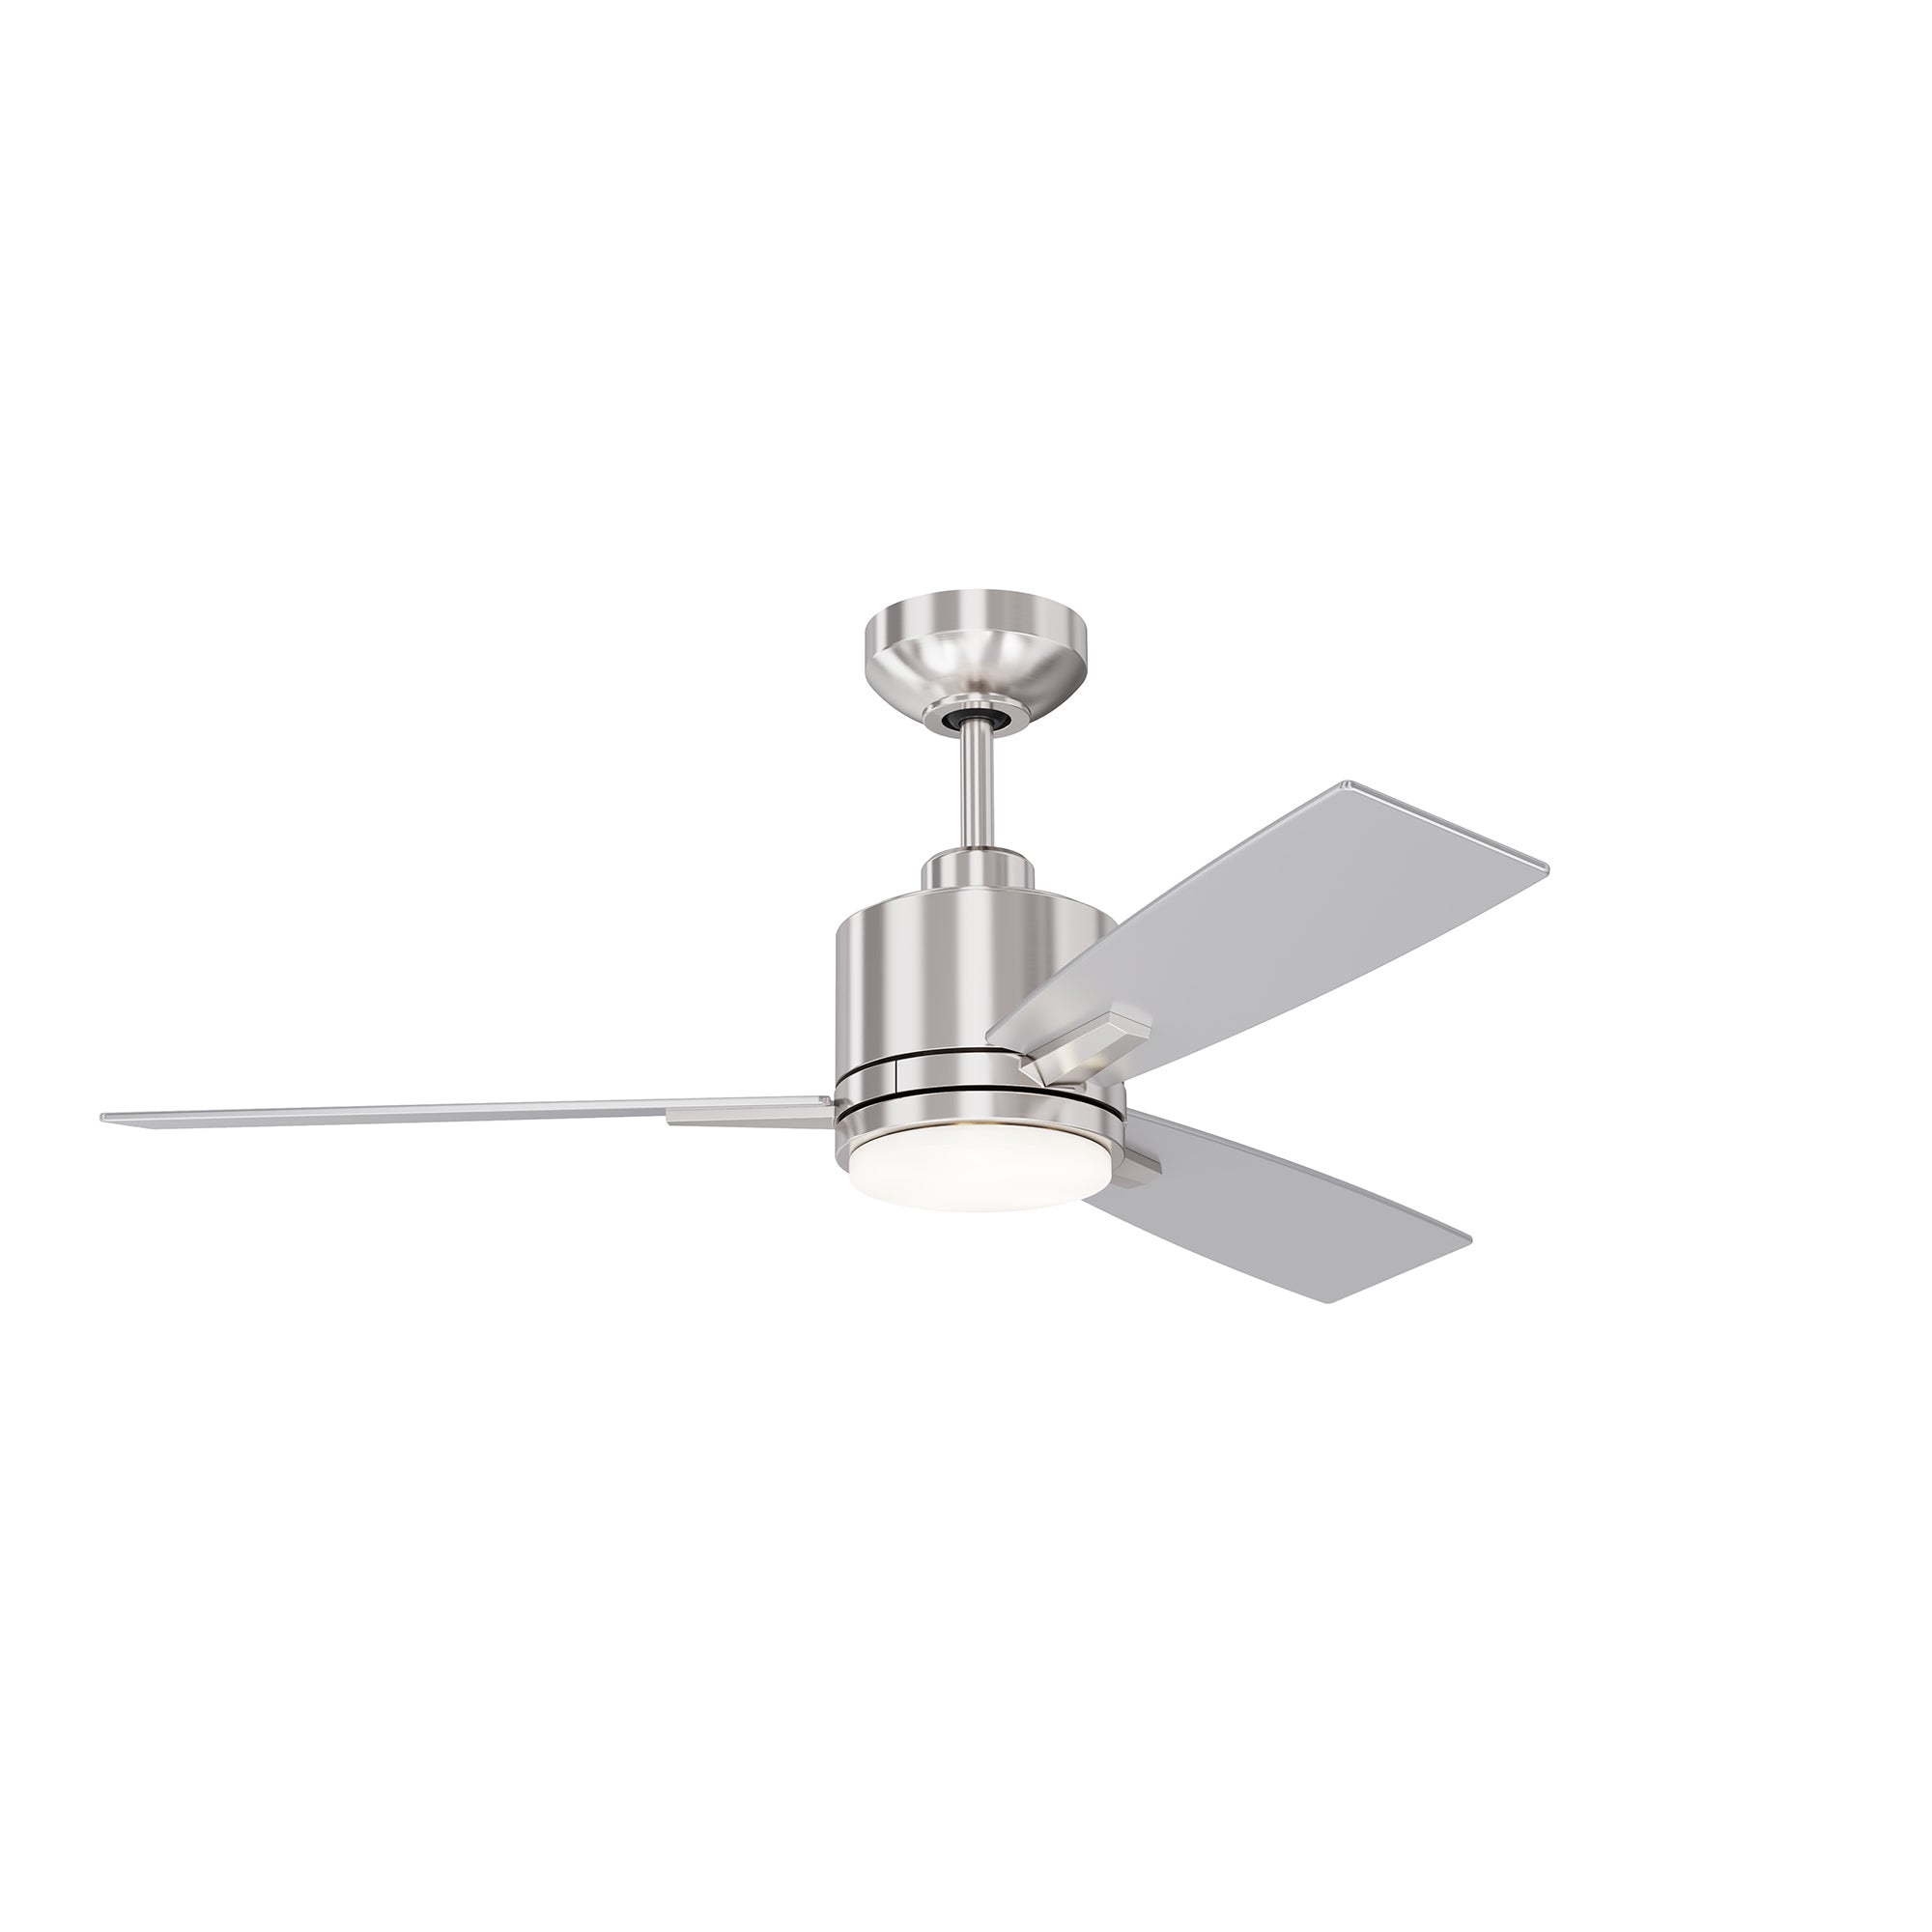 NUVEL Ceiling fan Nickel INTEGRATED LED - AC30842-SN | KENDAL